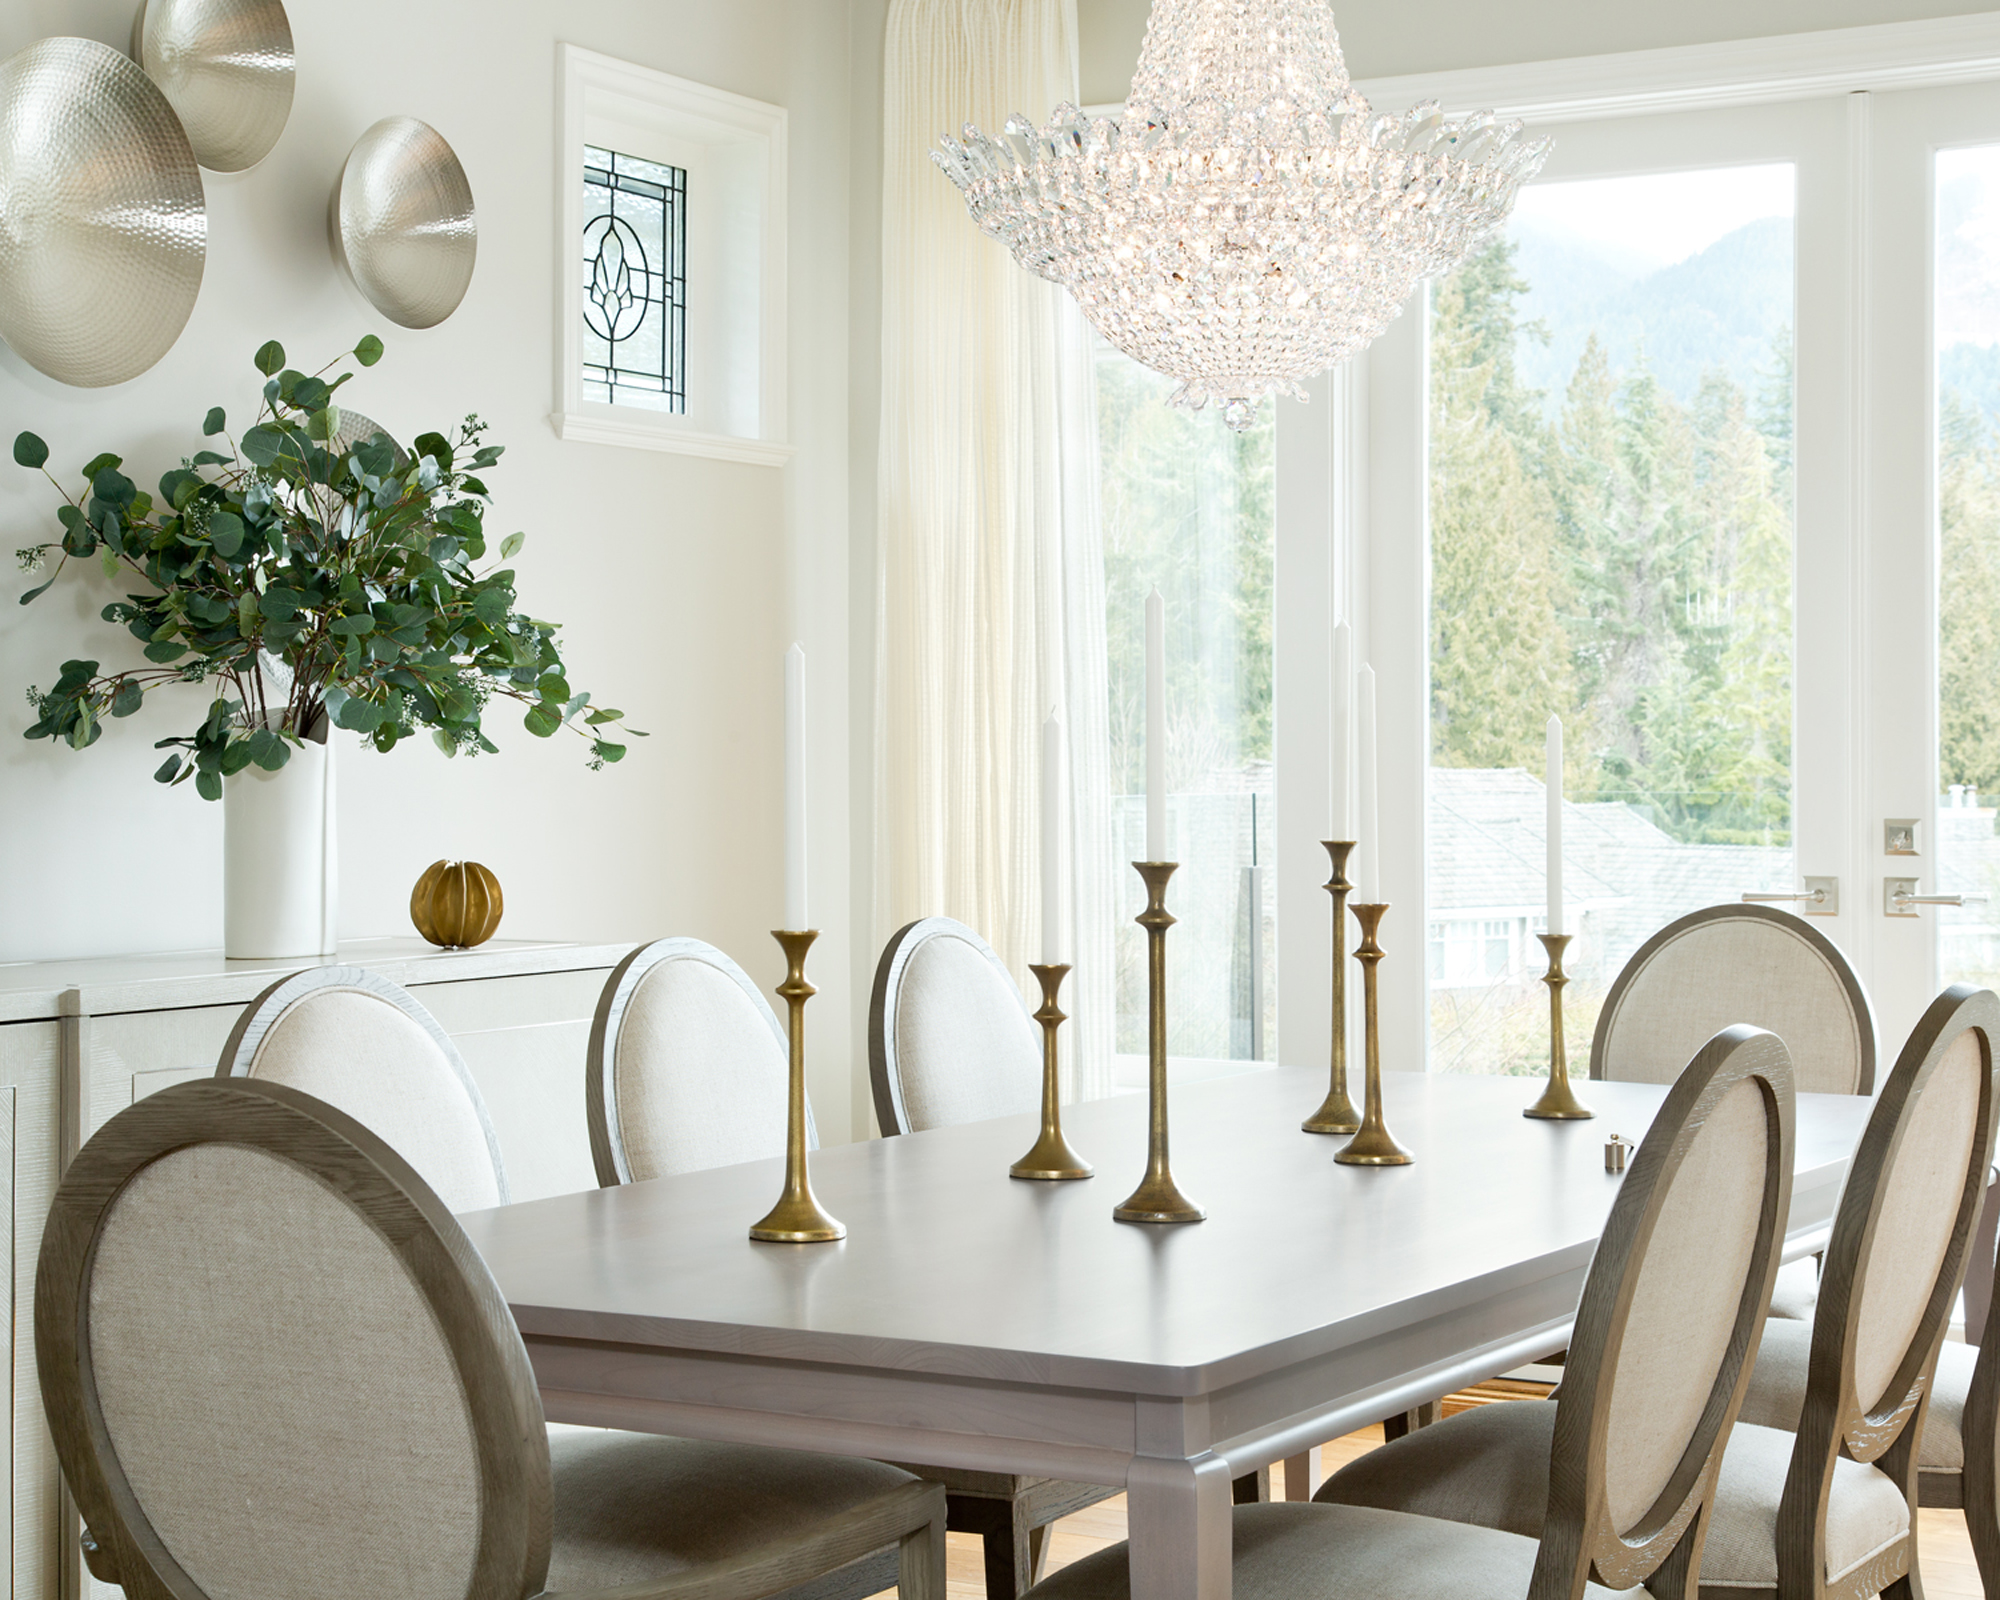 A small dining room idea with french windows, white curtains and walls and crystal chandelier over the table